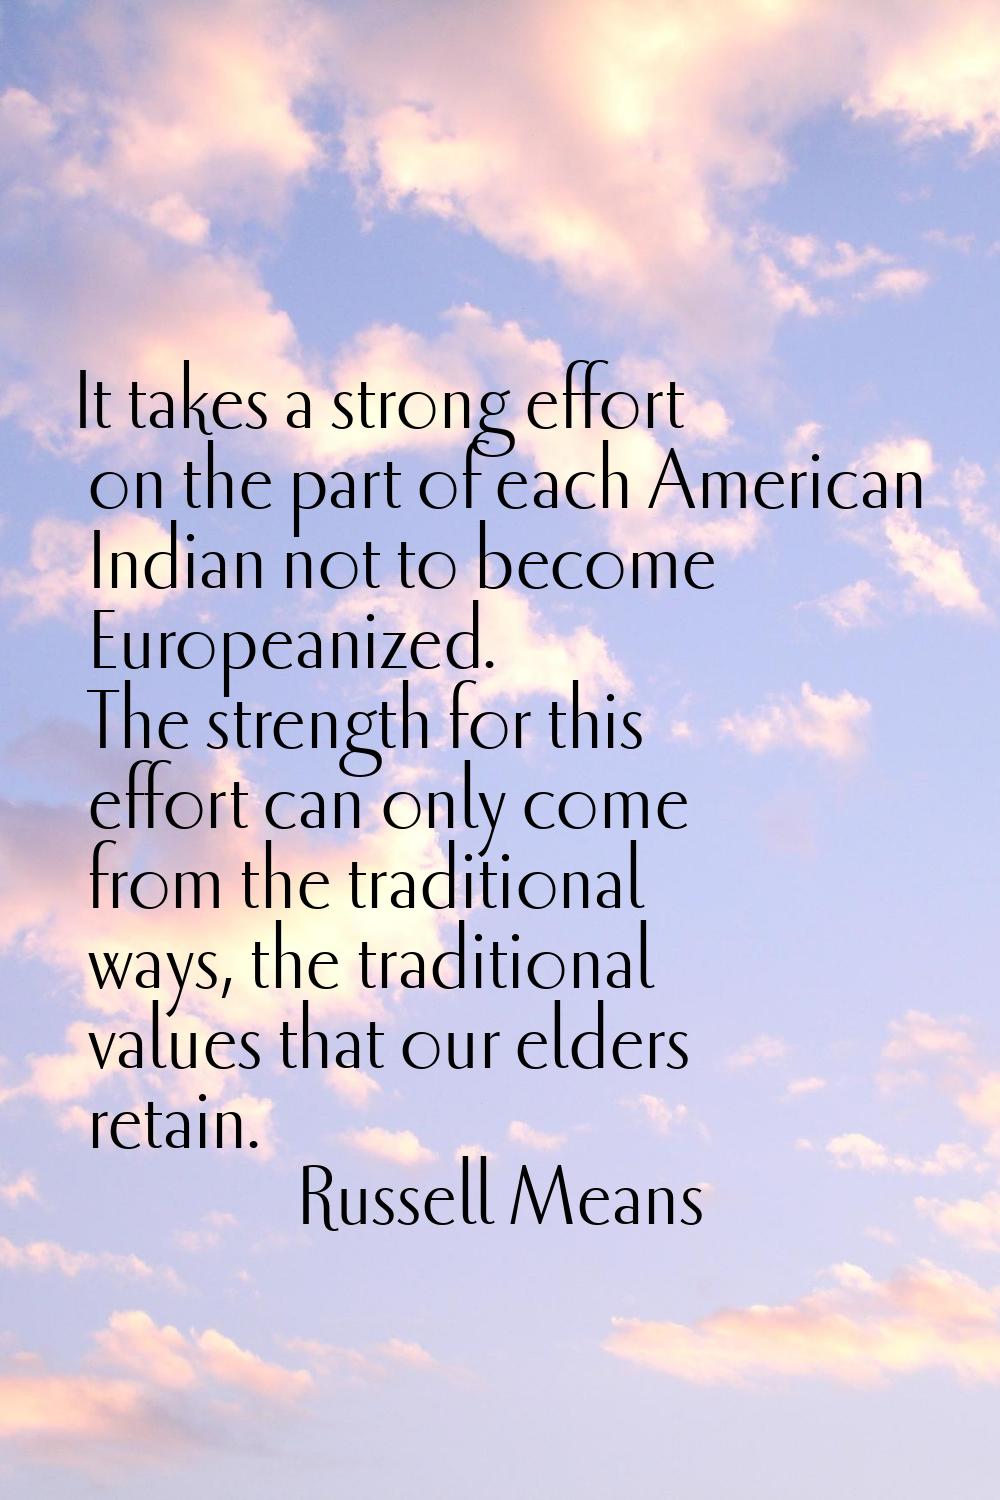 It takes a strong effort on the part of each American Indian not to become Europeanized. The streng